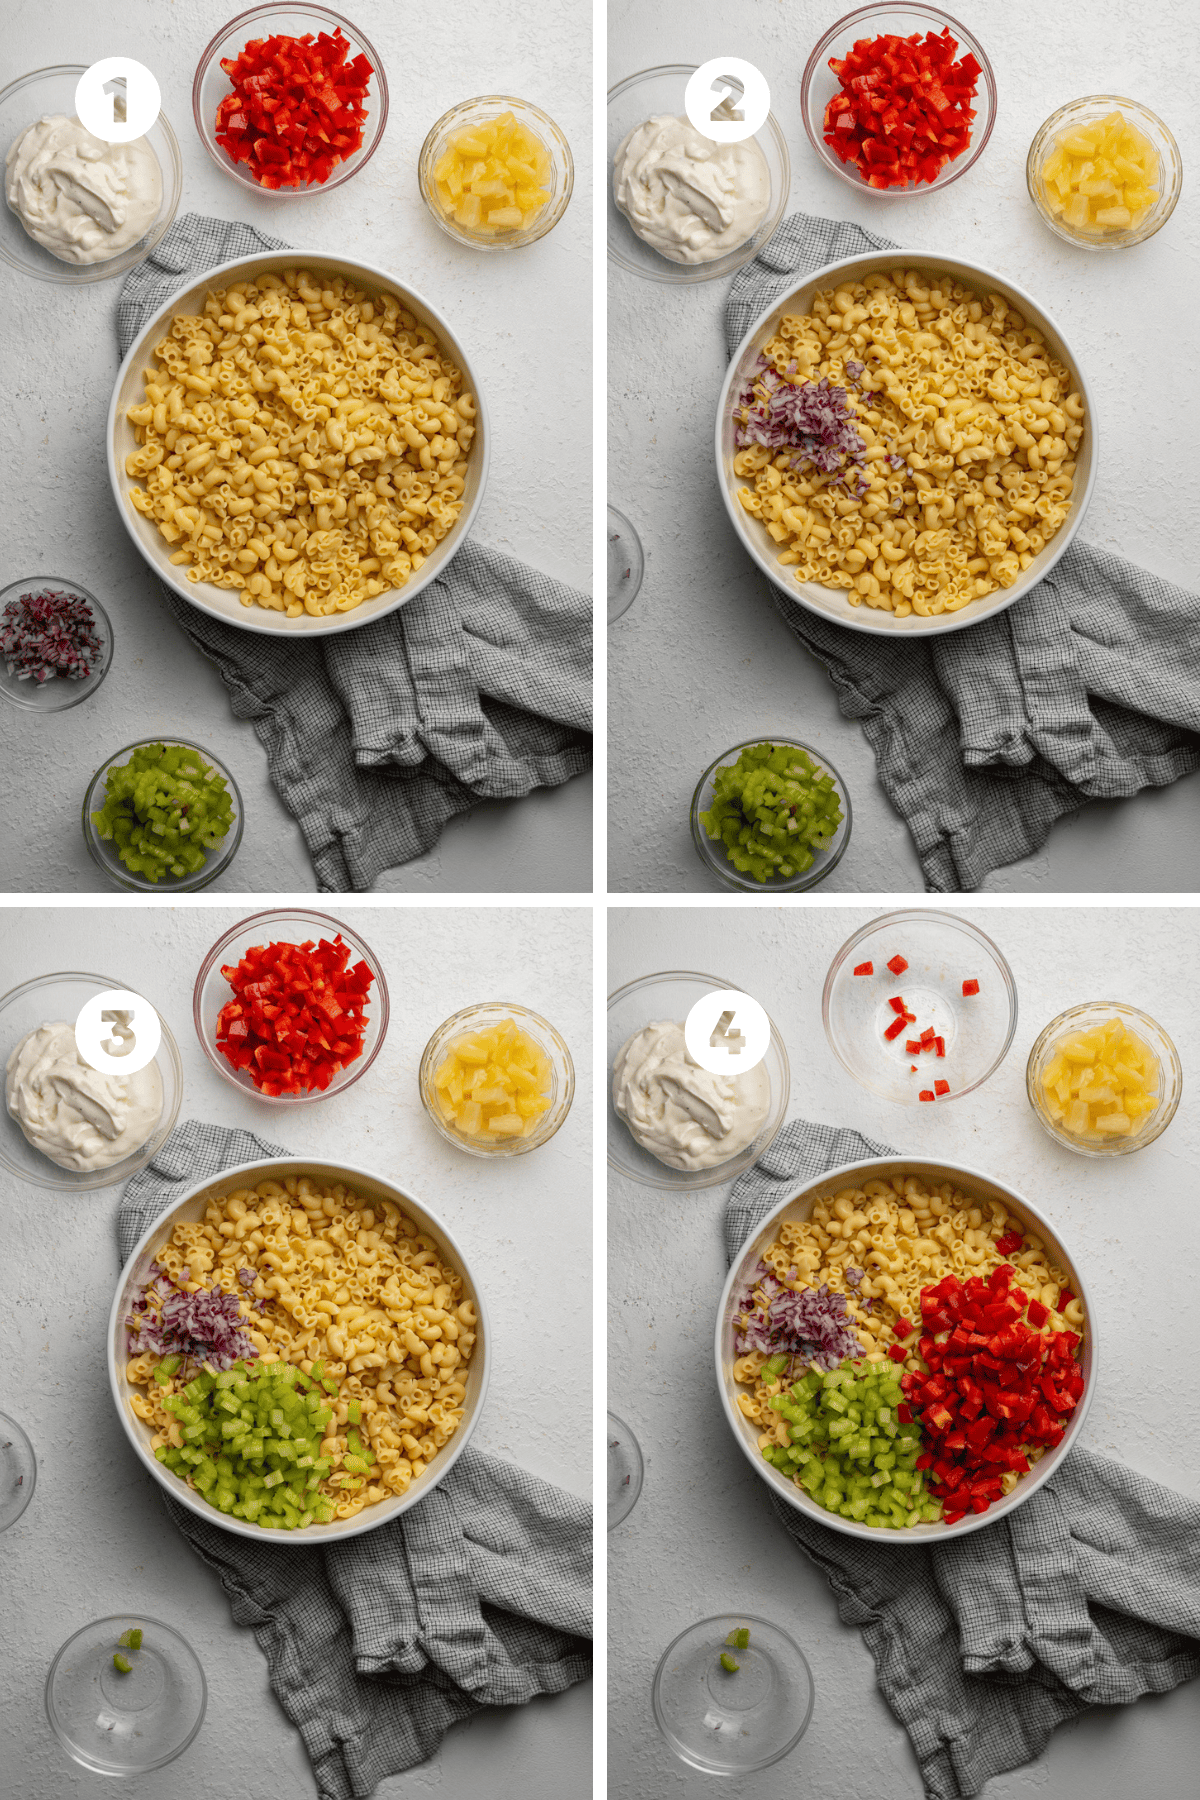 Collage of adding ingredients to a large bowl of macaroni noodles.